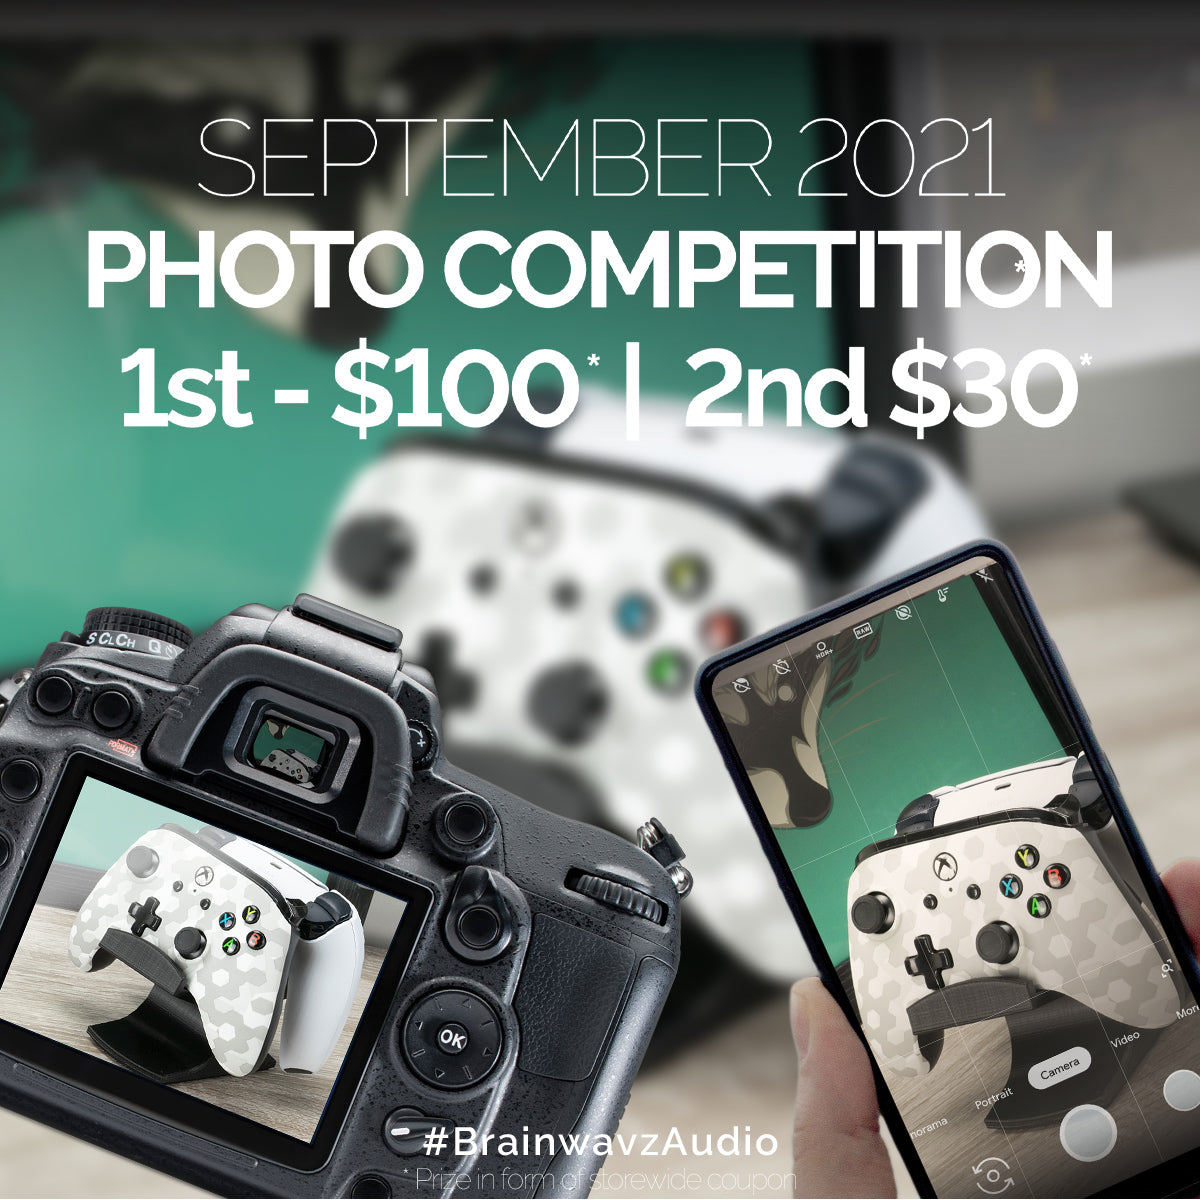 September photo competition